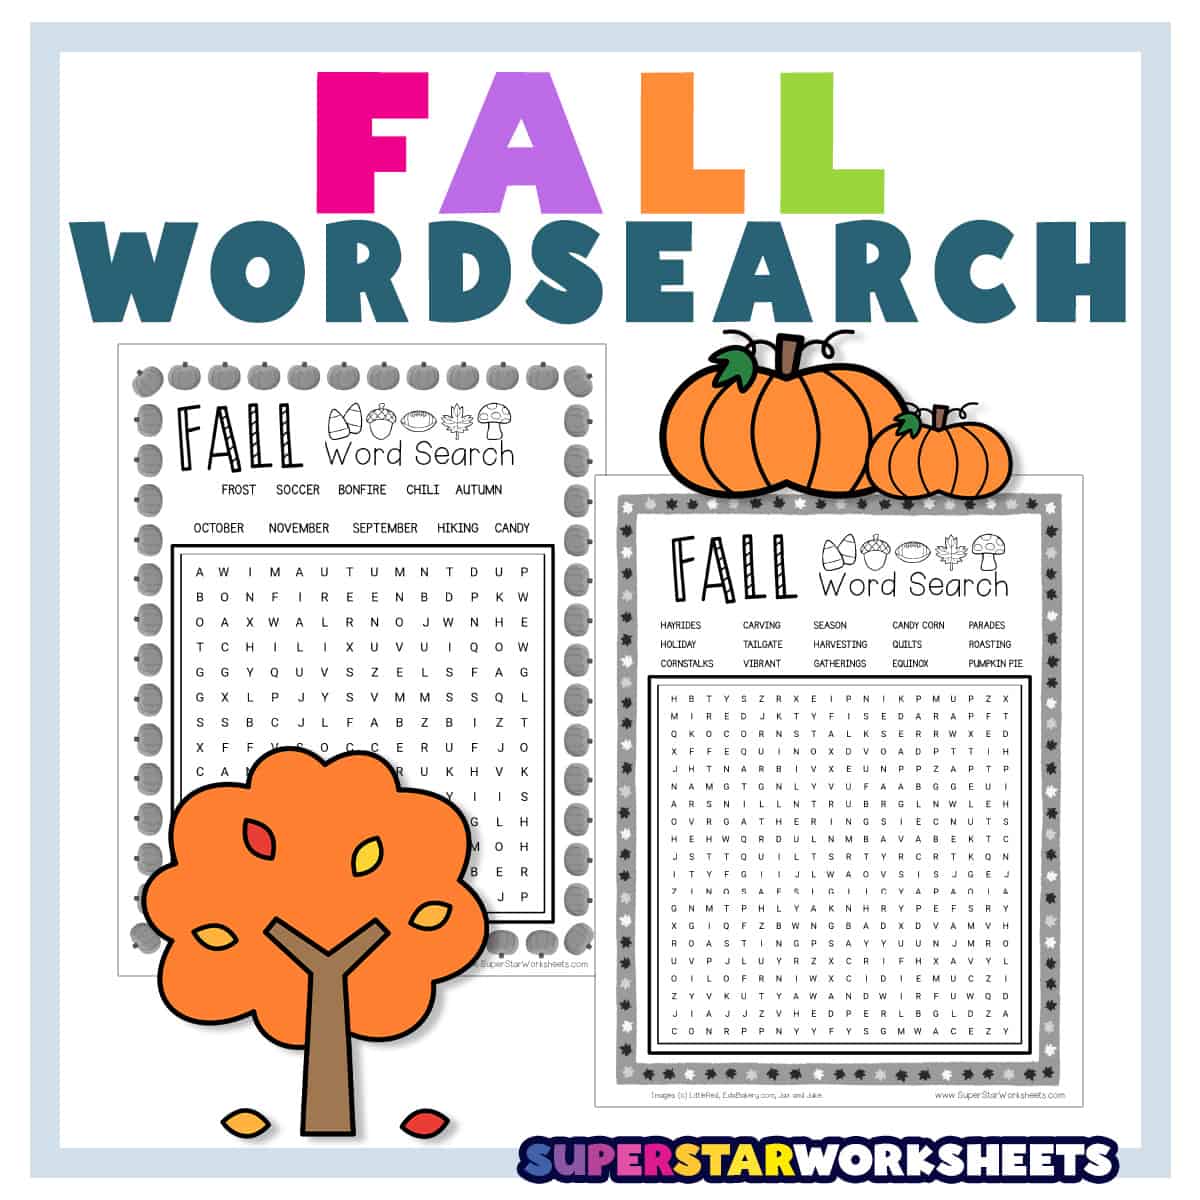 fall word search puzzles